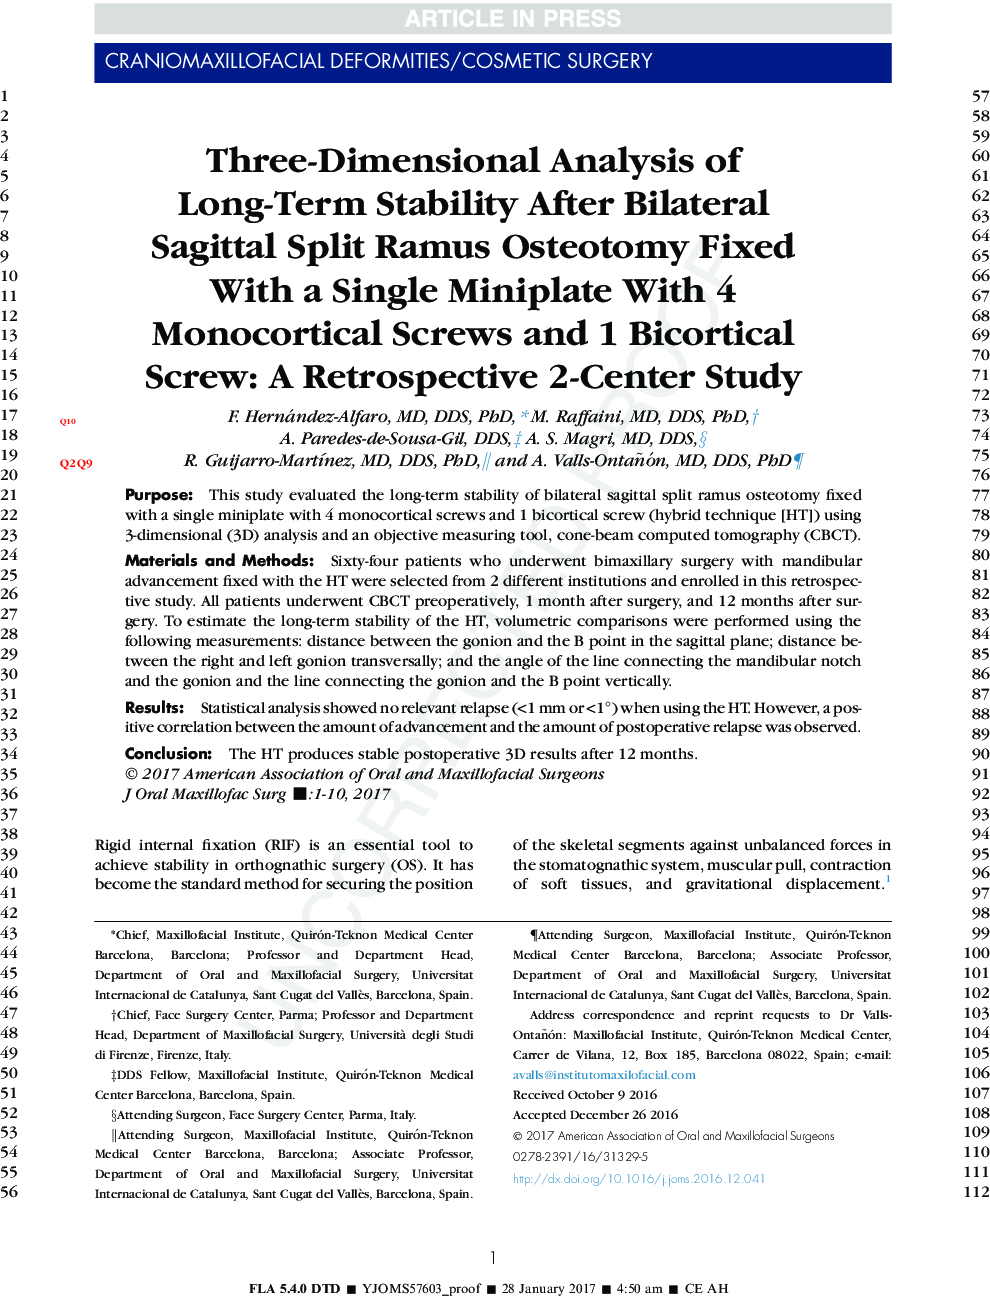 Three-Dimensional Analysis of Long-Term Stability After Bilateral Sagittal Split Ramus Osteotomy Fixed With a Single Miniplate With 4 Monocortical Screws and 1 Bicortical Screw: A Retrospective 2-Center Study